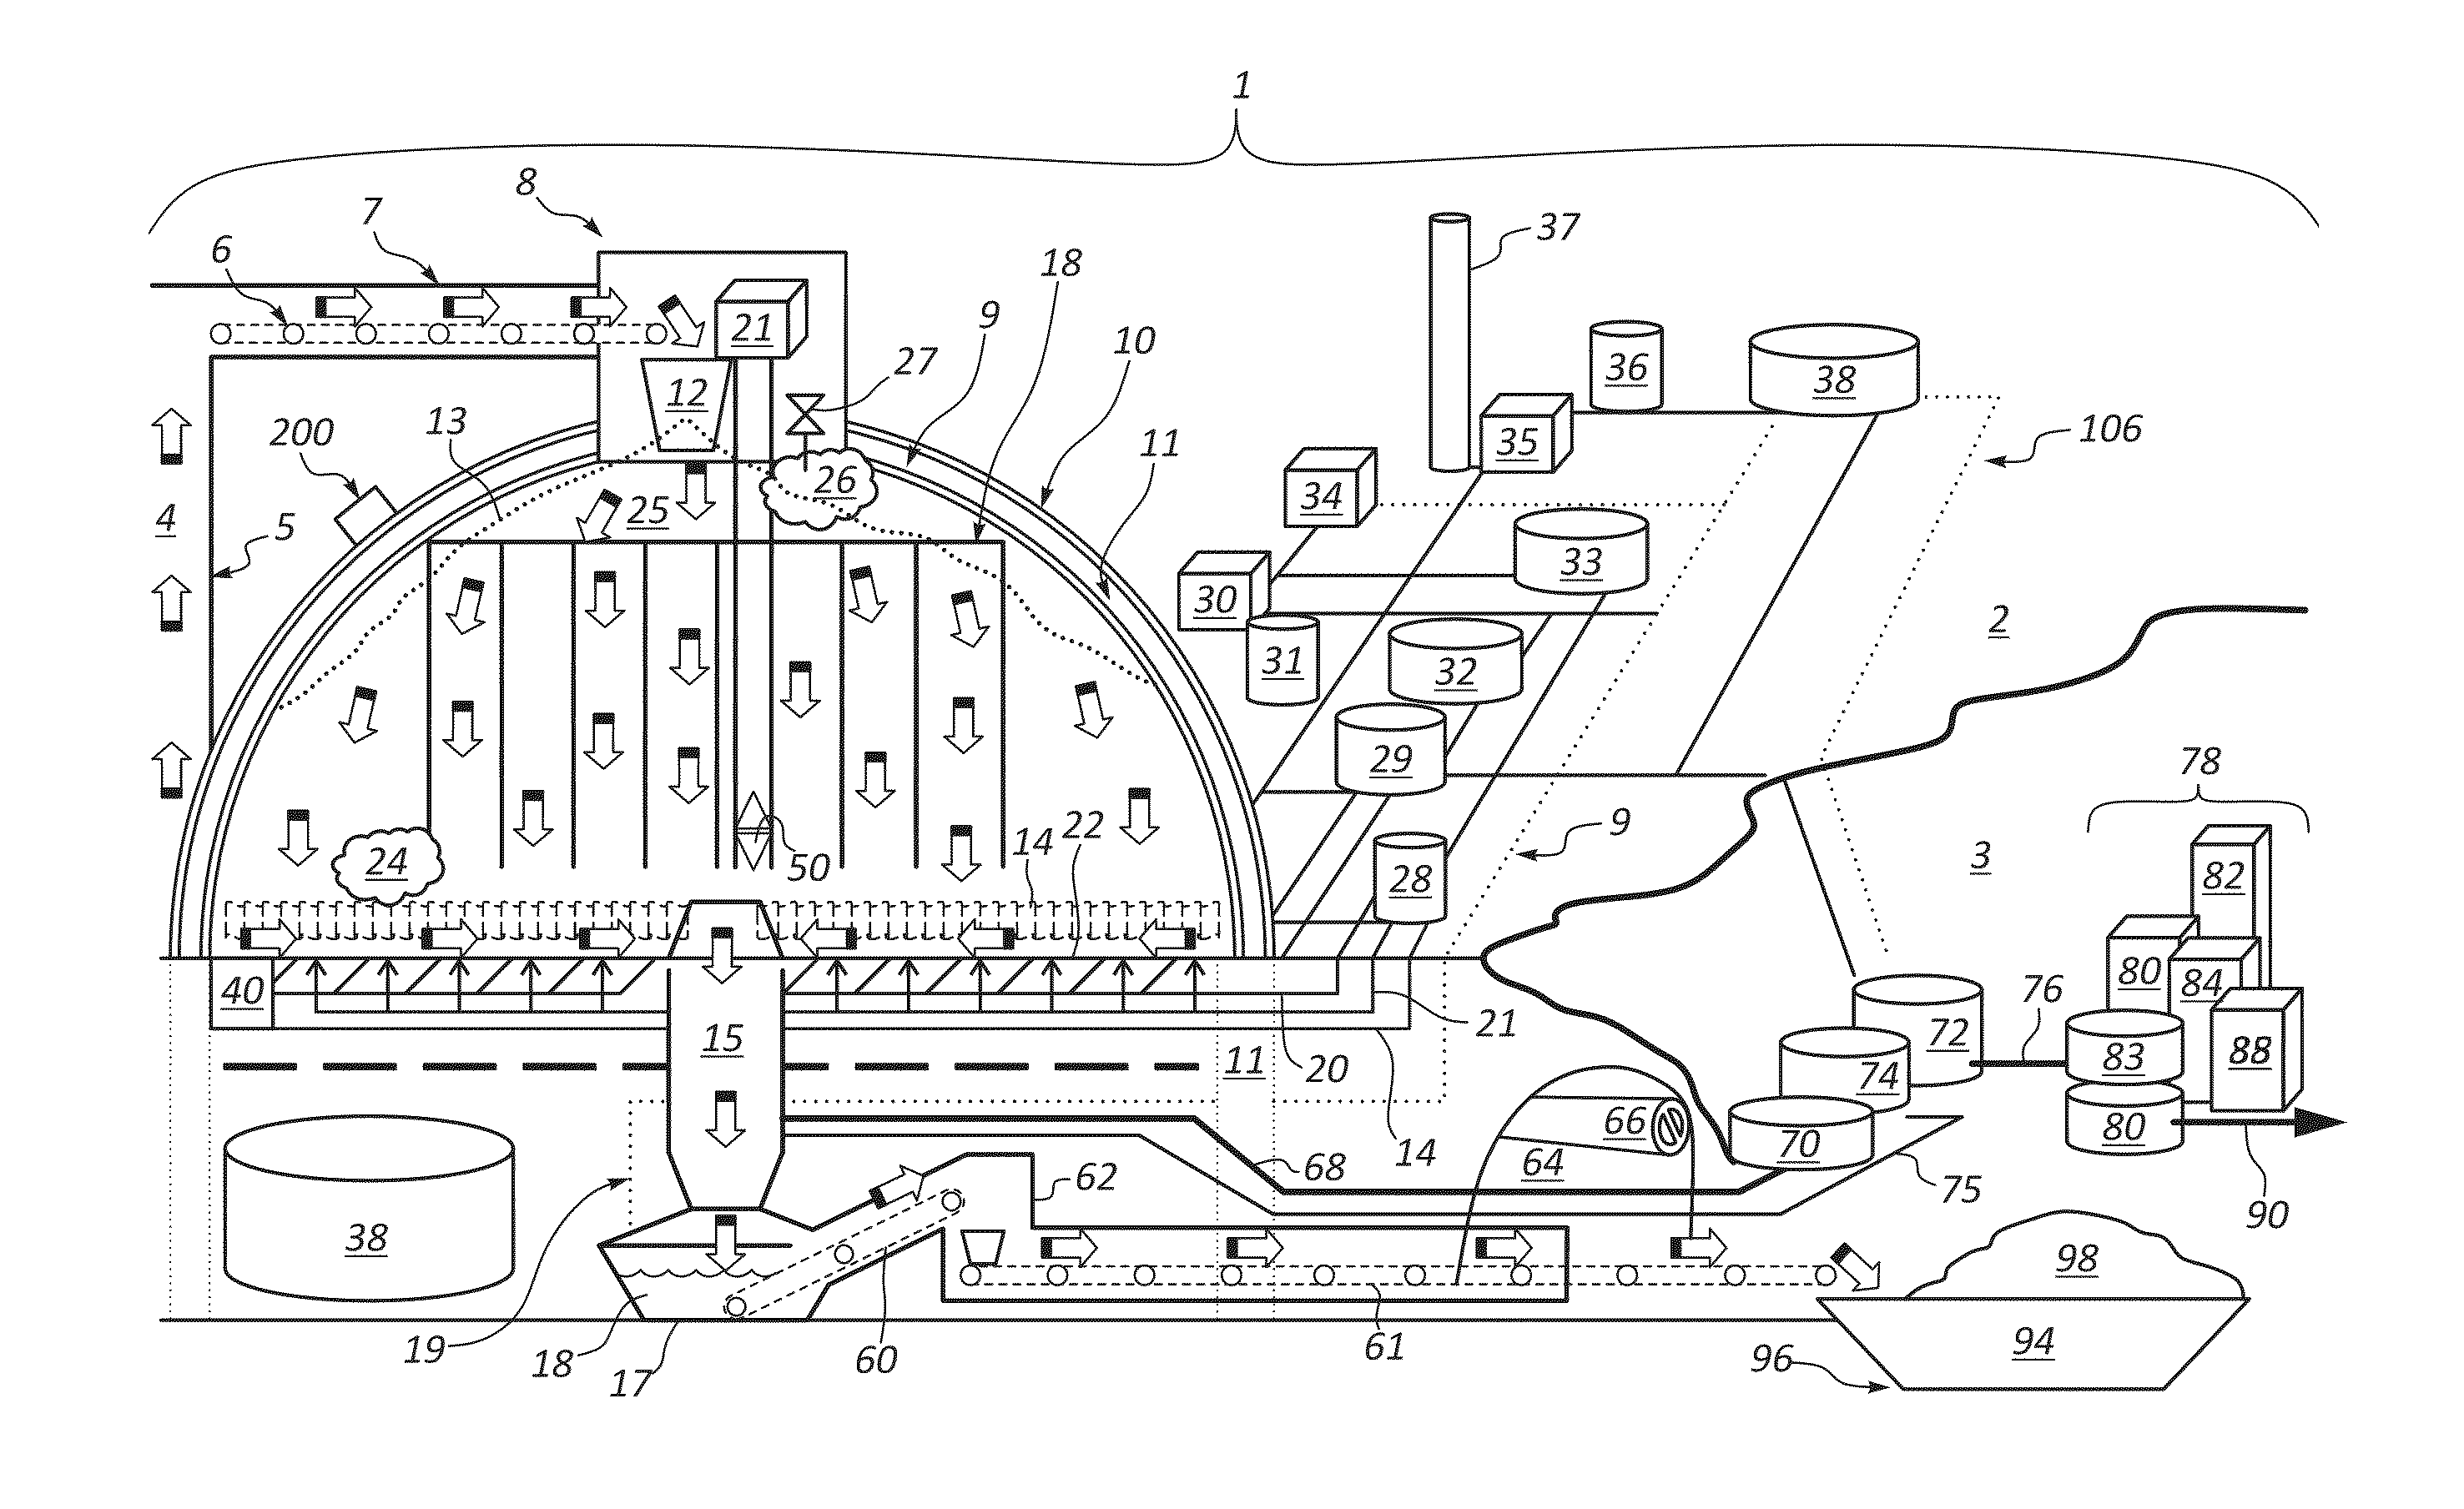 Systems, Apparatus and Methods of a Dome Retort